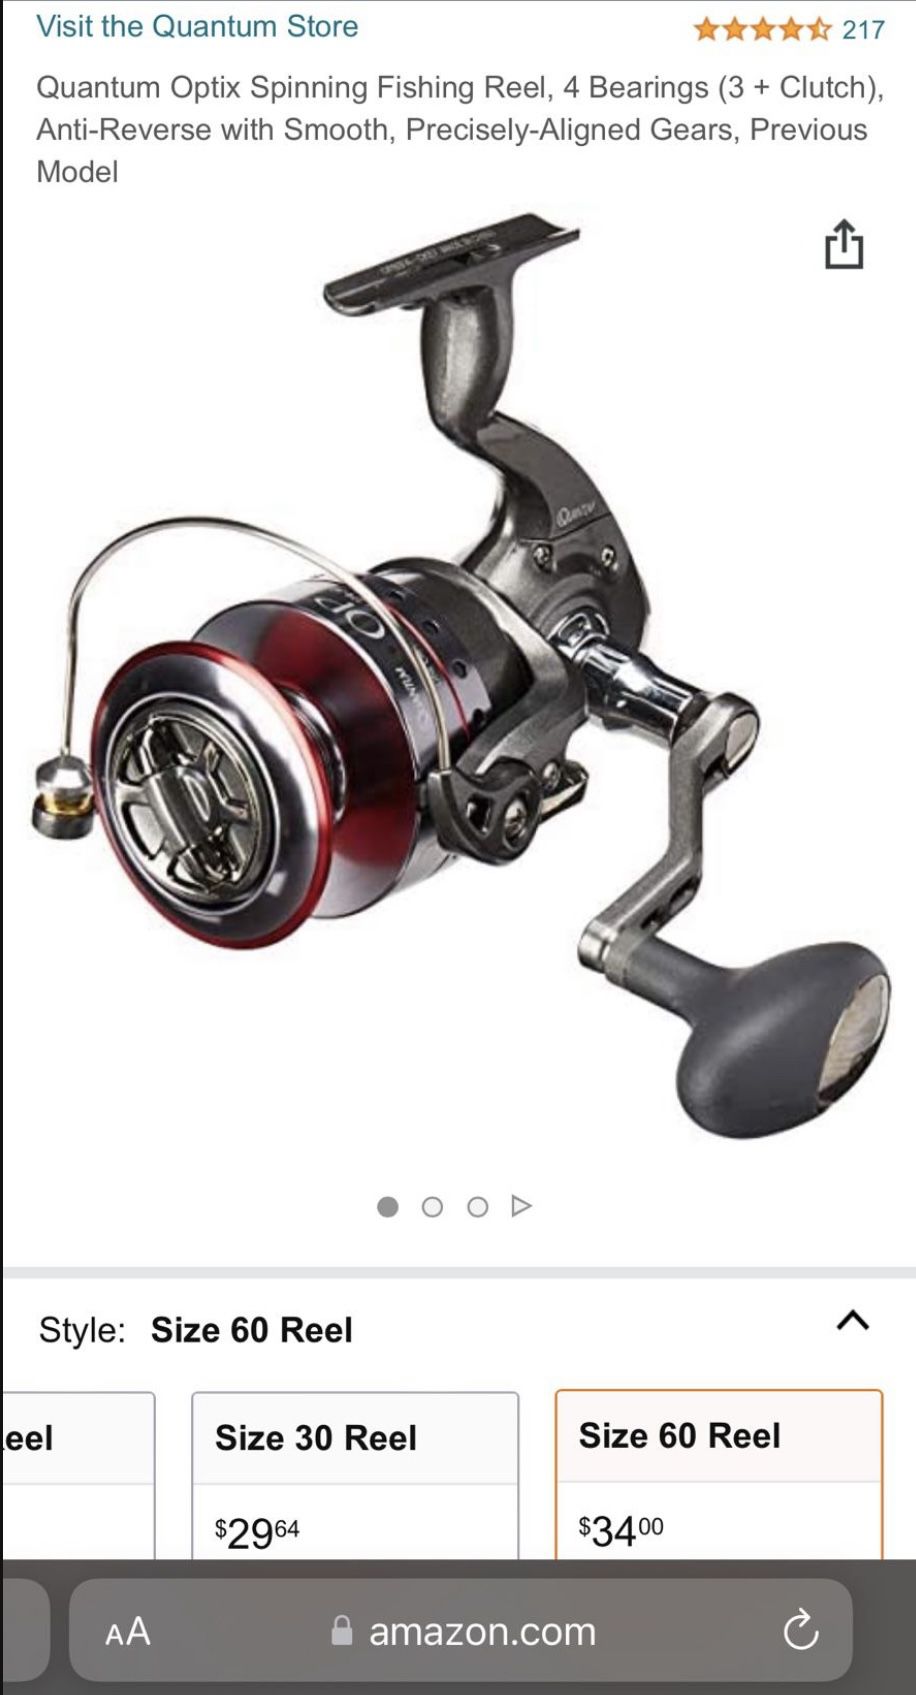 Brand New Quantum Optix Spinning Fishing Reel, Size 60 for Sale in